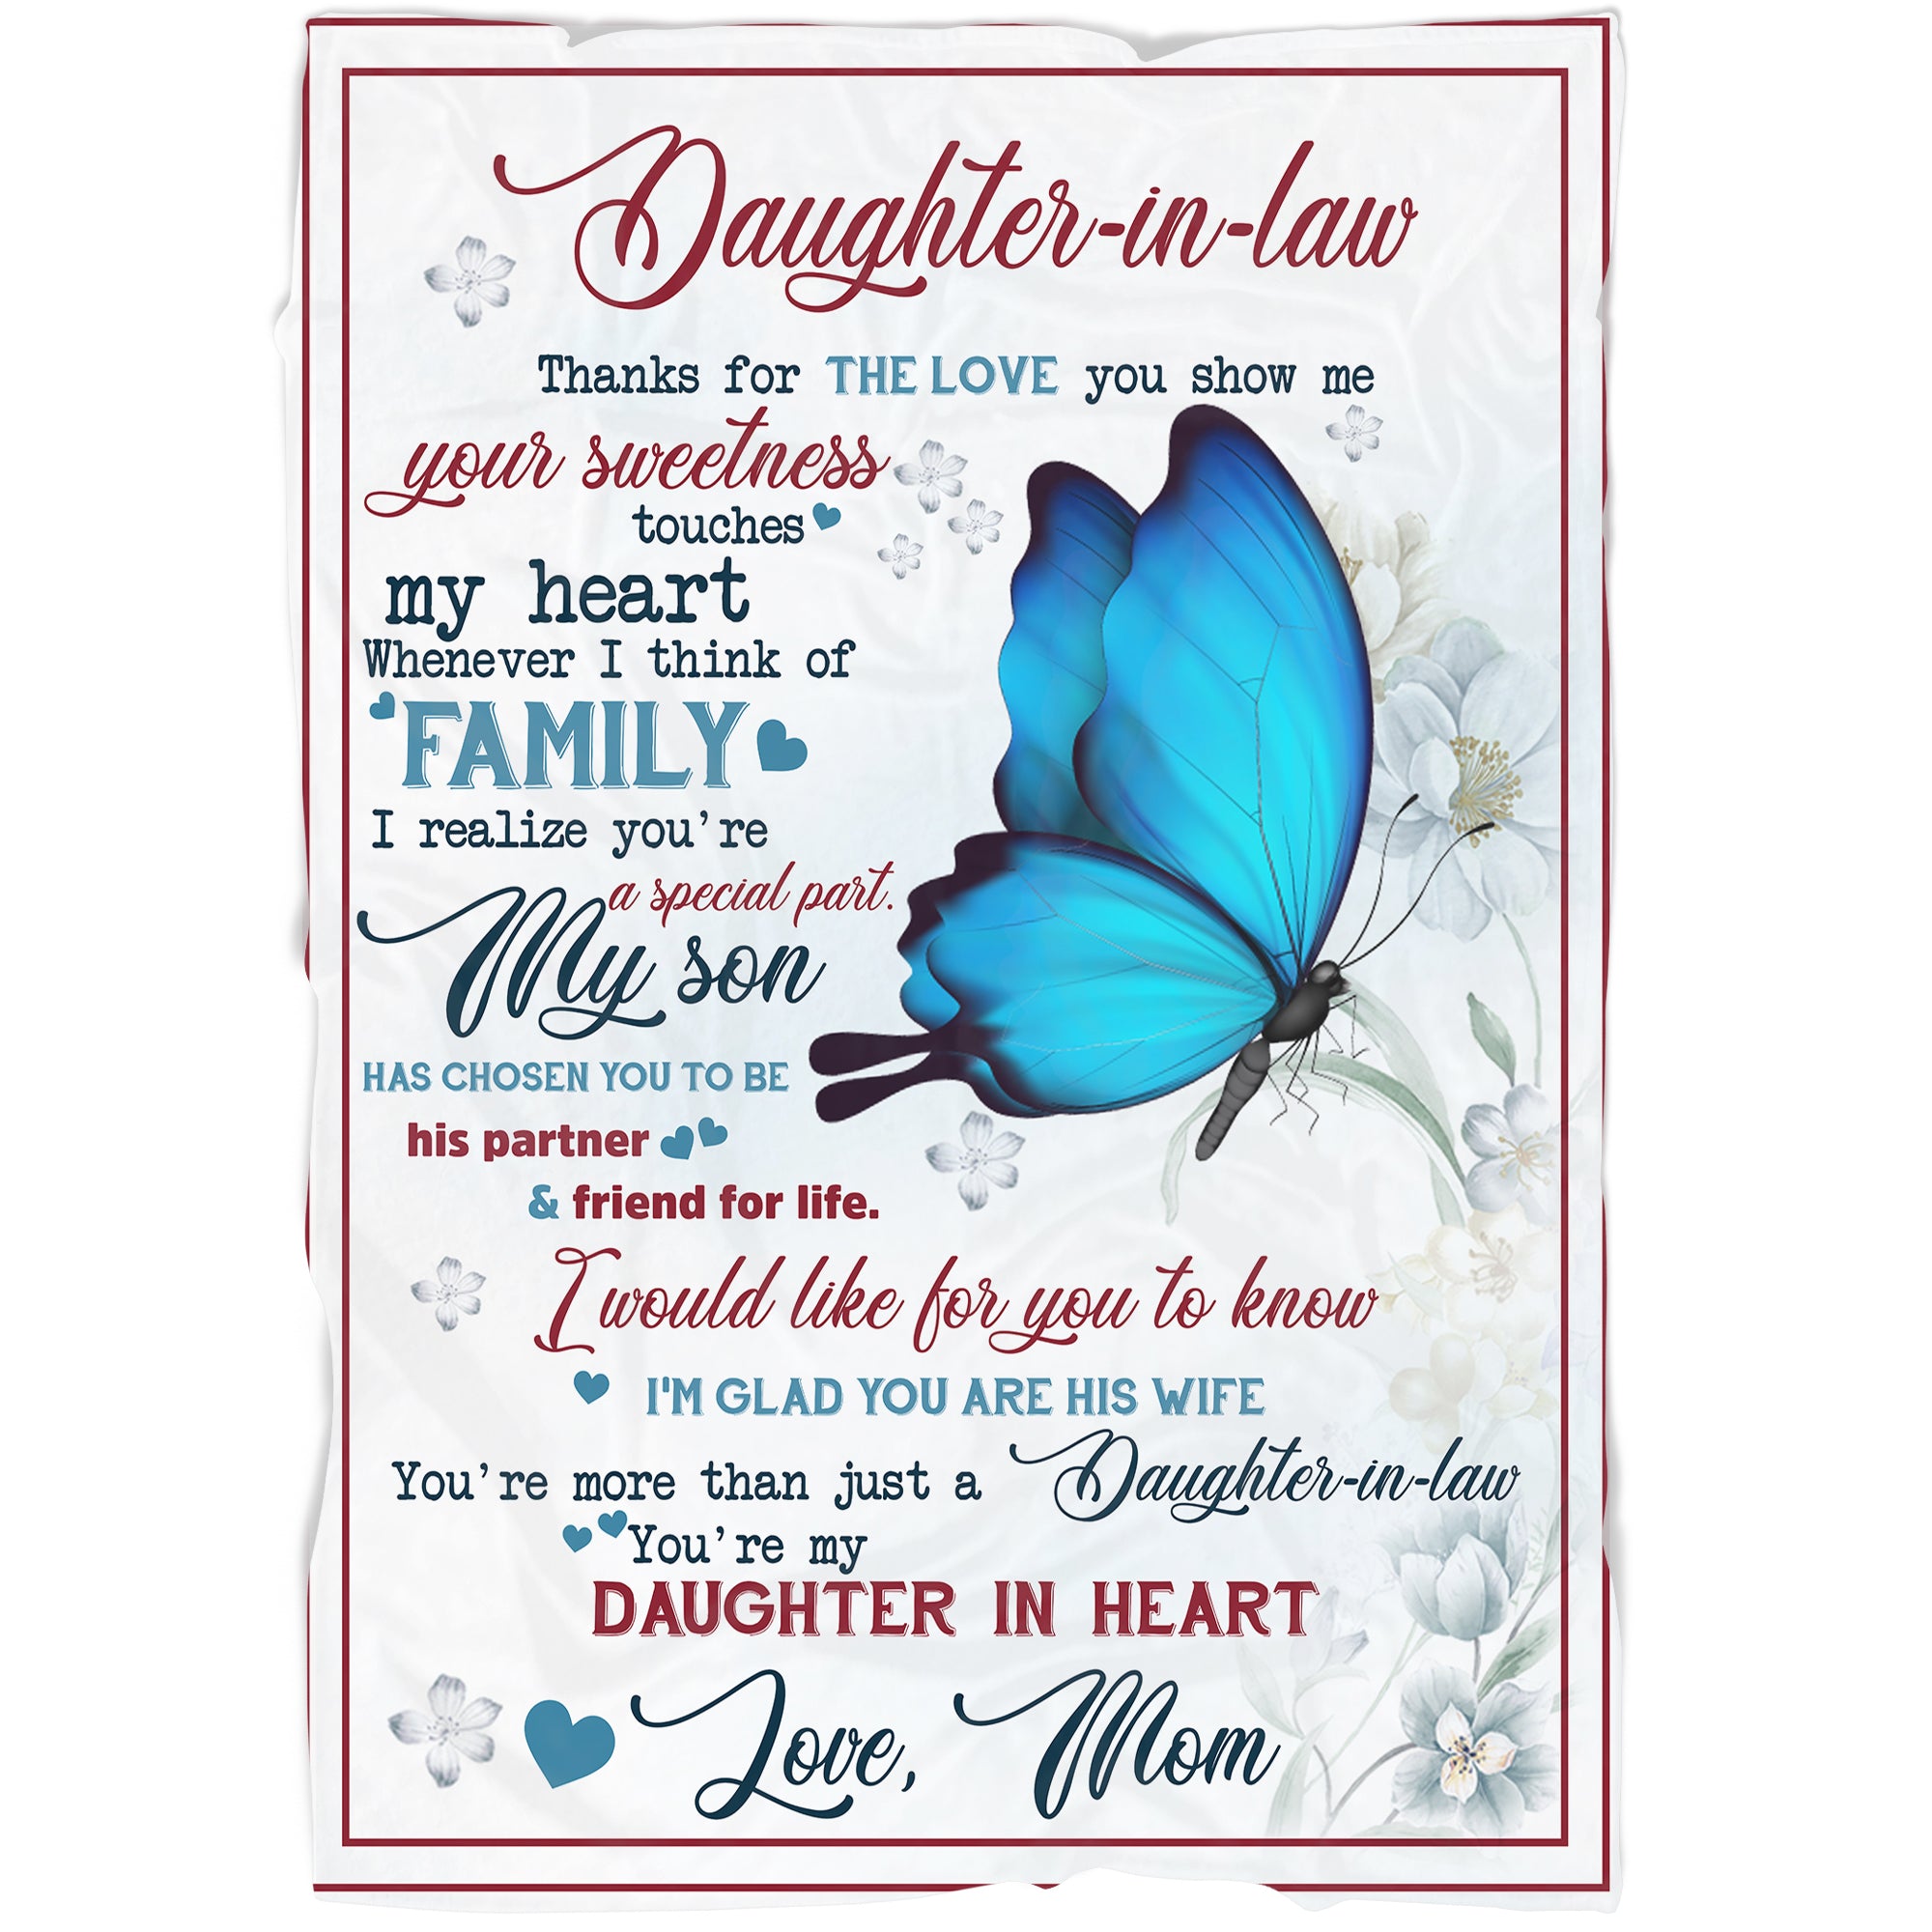 Daughter-in-law Blanket - Touches My Heart Butterfly Fleece Blanket Gift for Daughter In Law from Mom Daughter In Law Gift for Christmas Birthday Anniversary Wedding - JB248